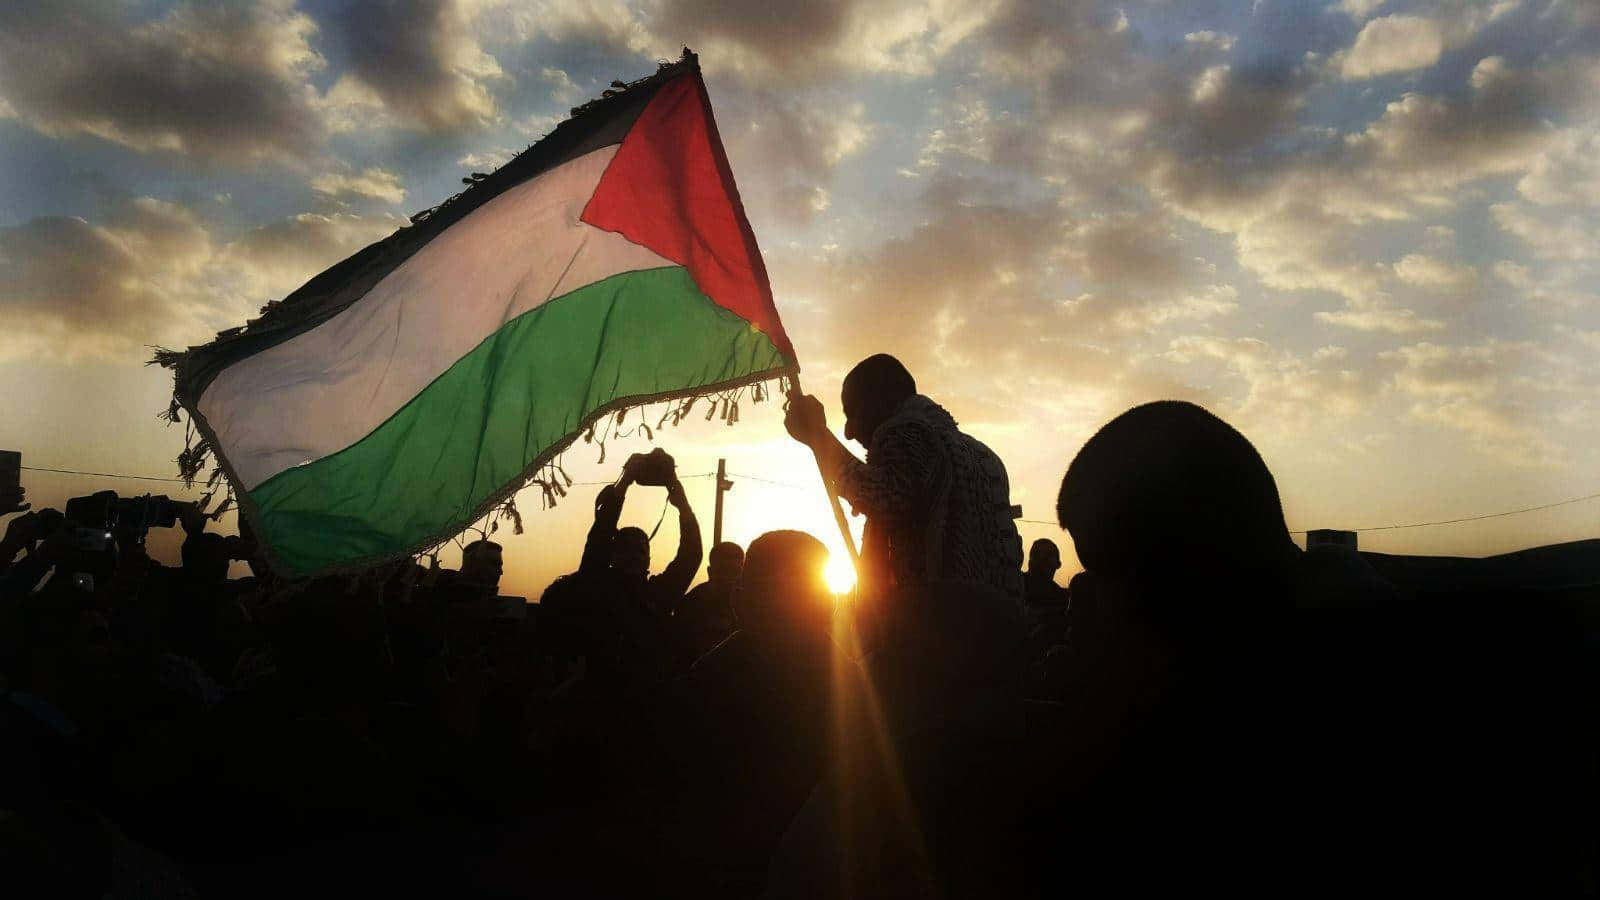 A Man Holds Up A Palestinian Flag In The Sun